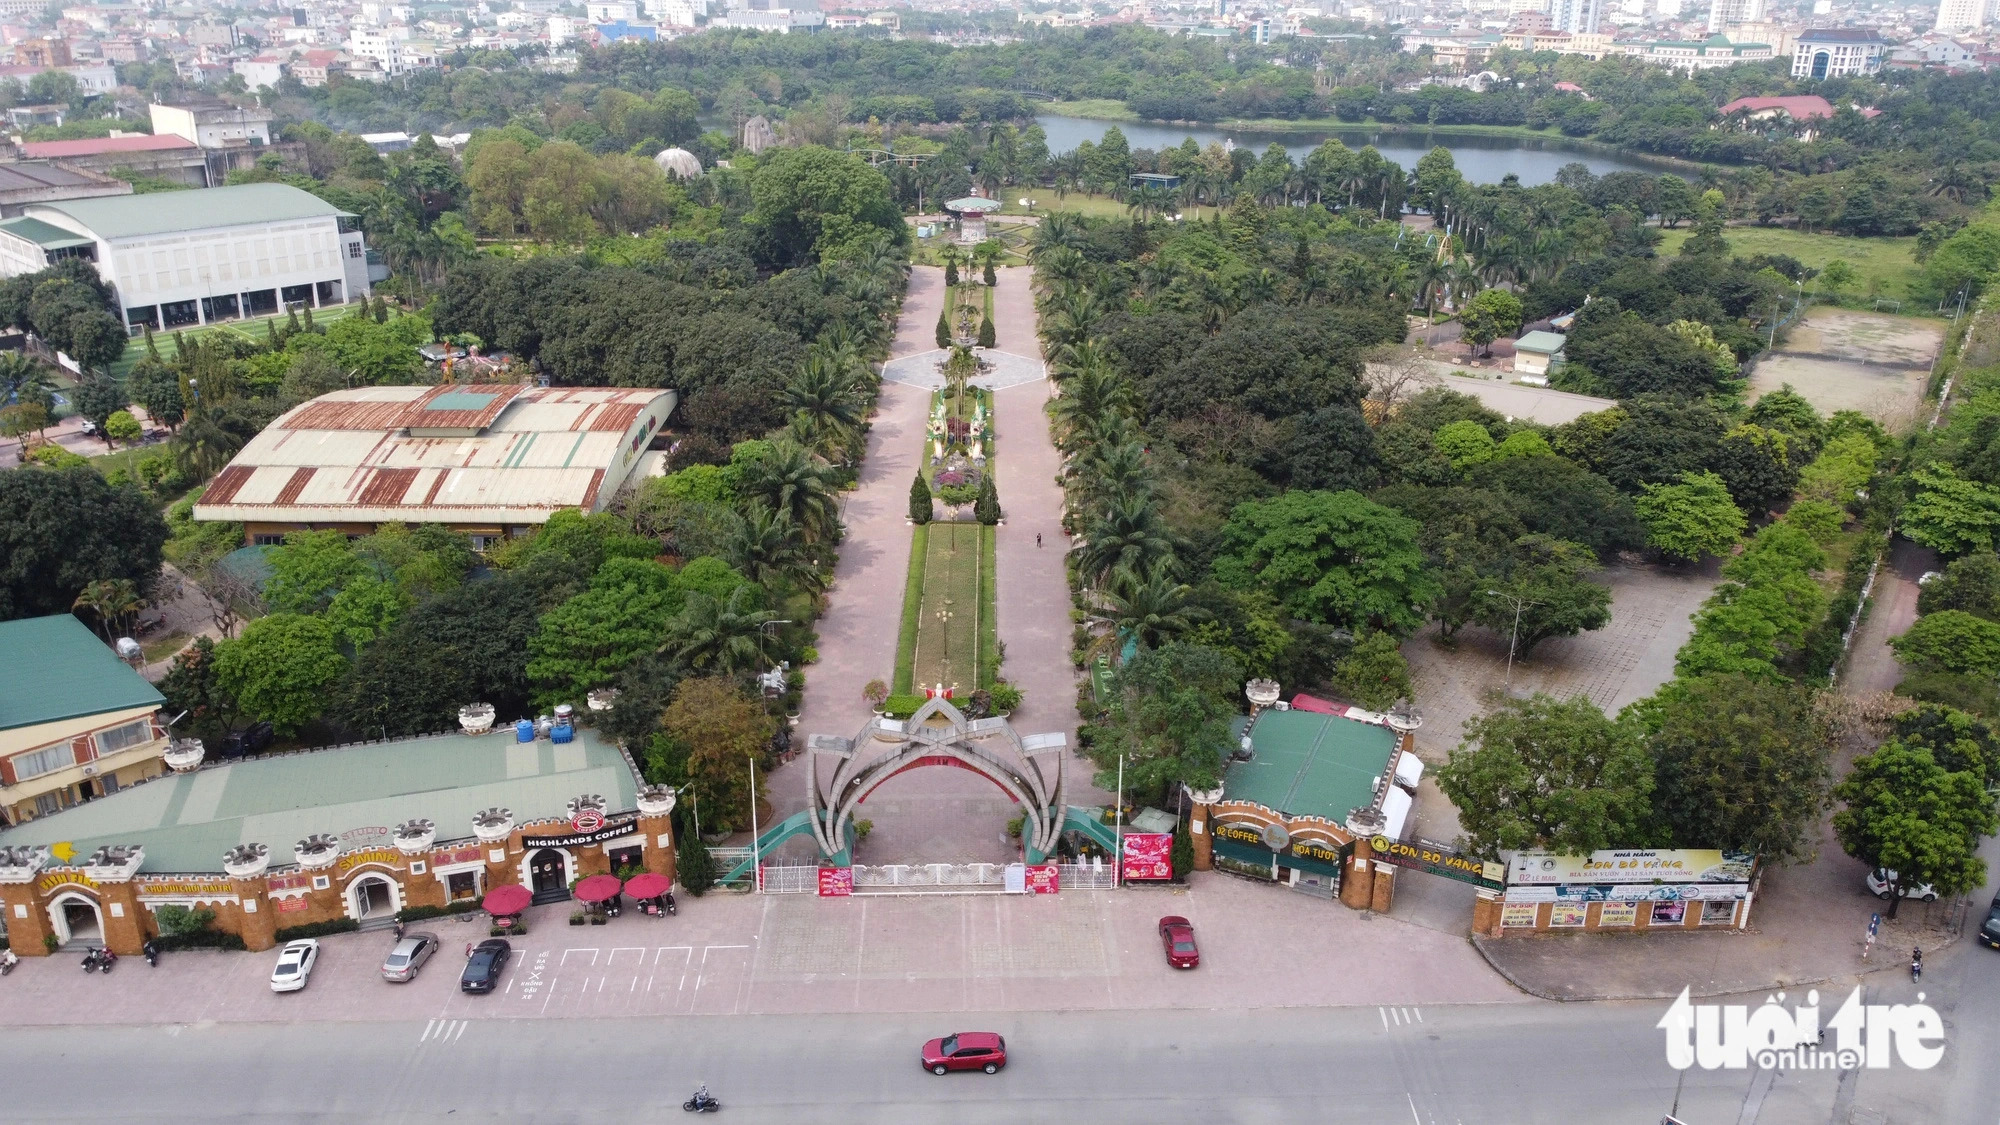 Renovation underway at abandoned downtown park in Vietnam’s Nghe An